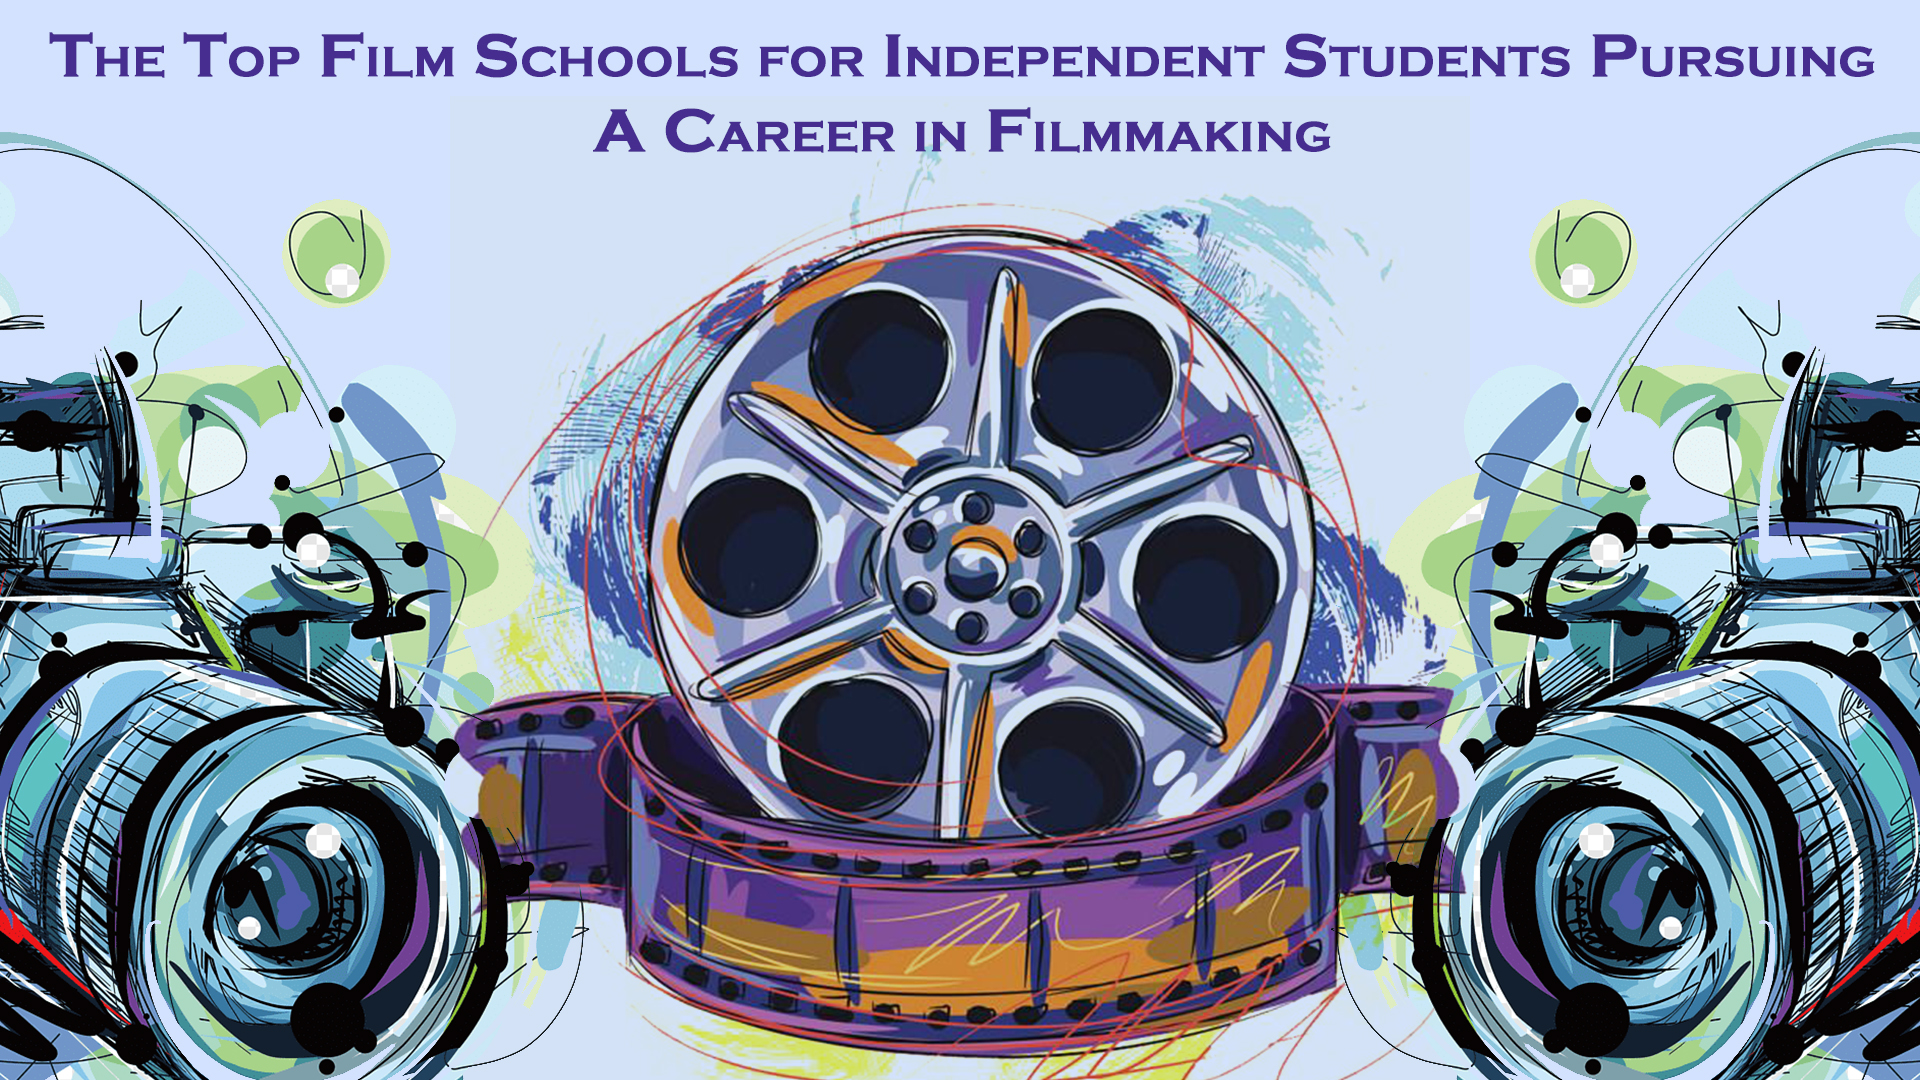 The Top Film Schools For Independent Students Perusing a Career In Filmmaking